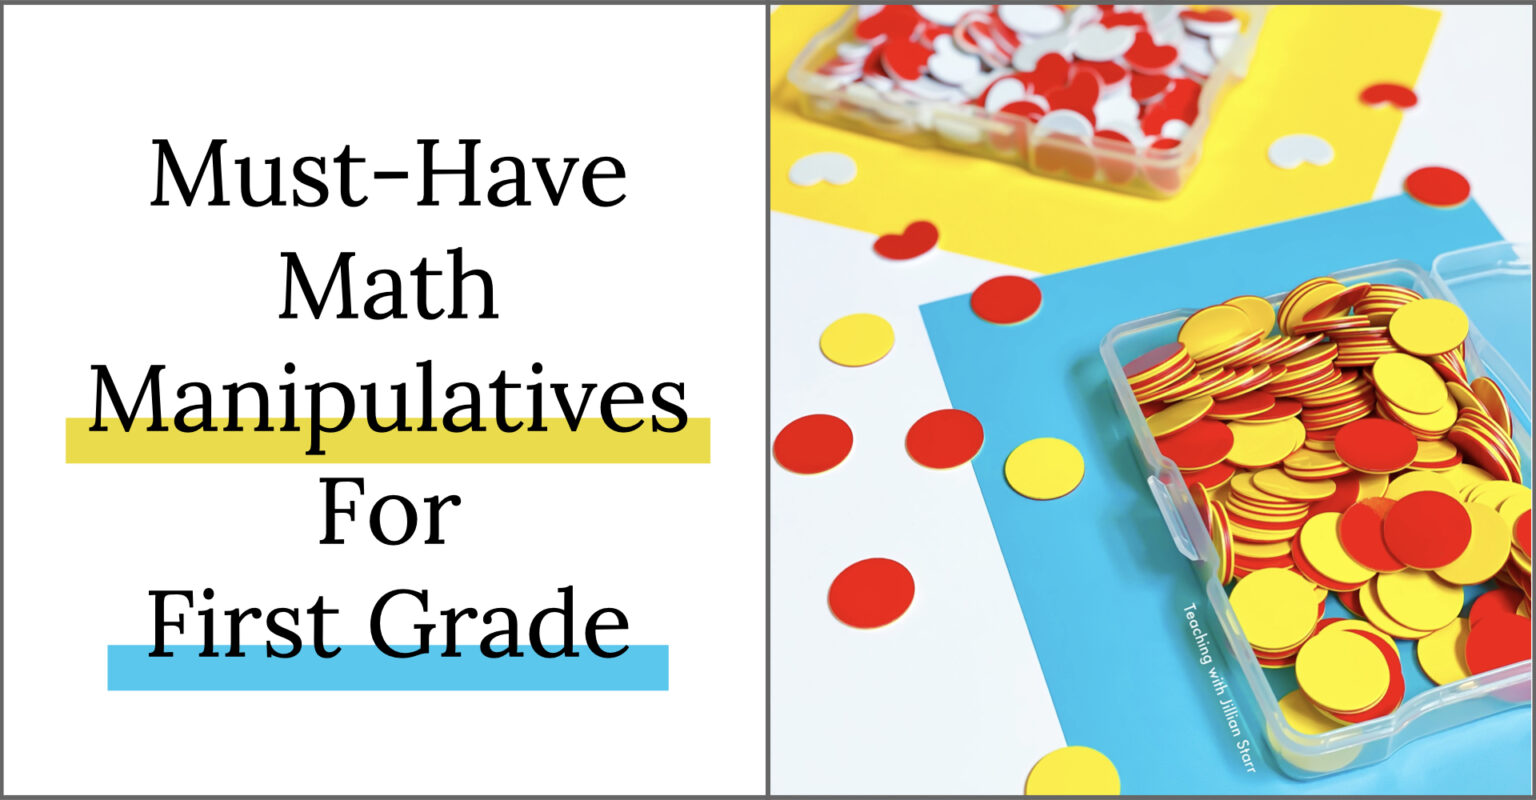 What Math Manipulatives For 2nd Grade